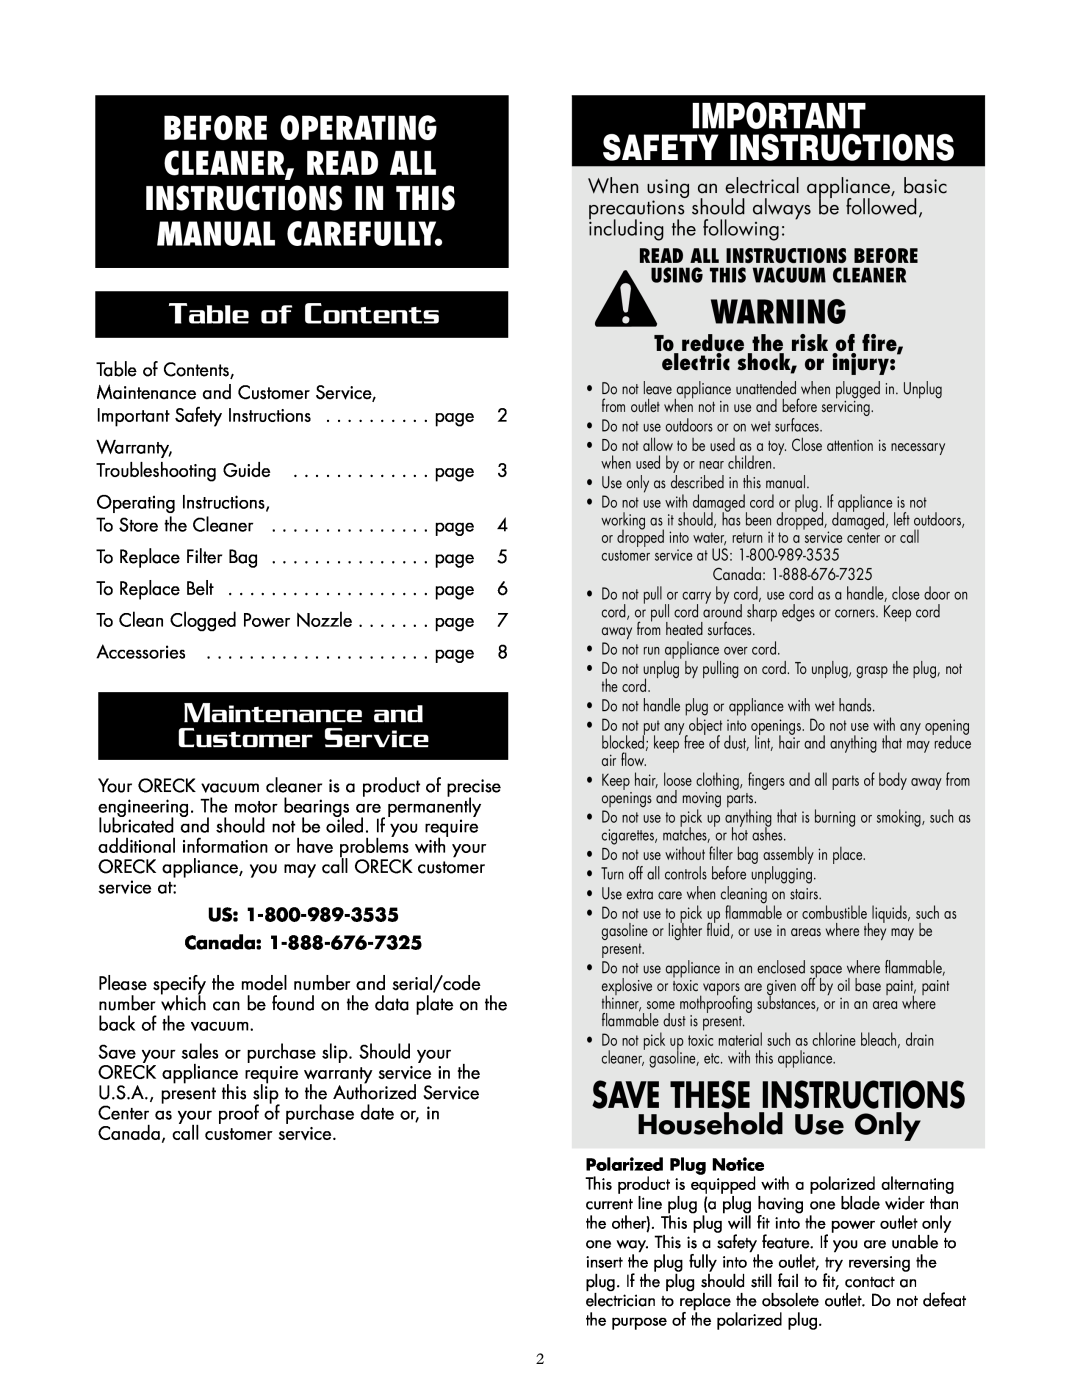 Oreck APU255 Save These Instructions, Table of Contents, Maintenance and Customer Service, Read All Instructions Before 